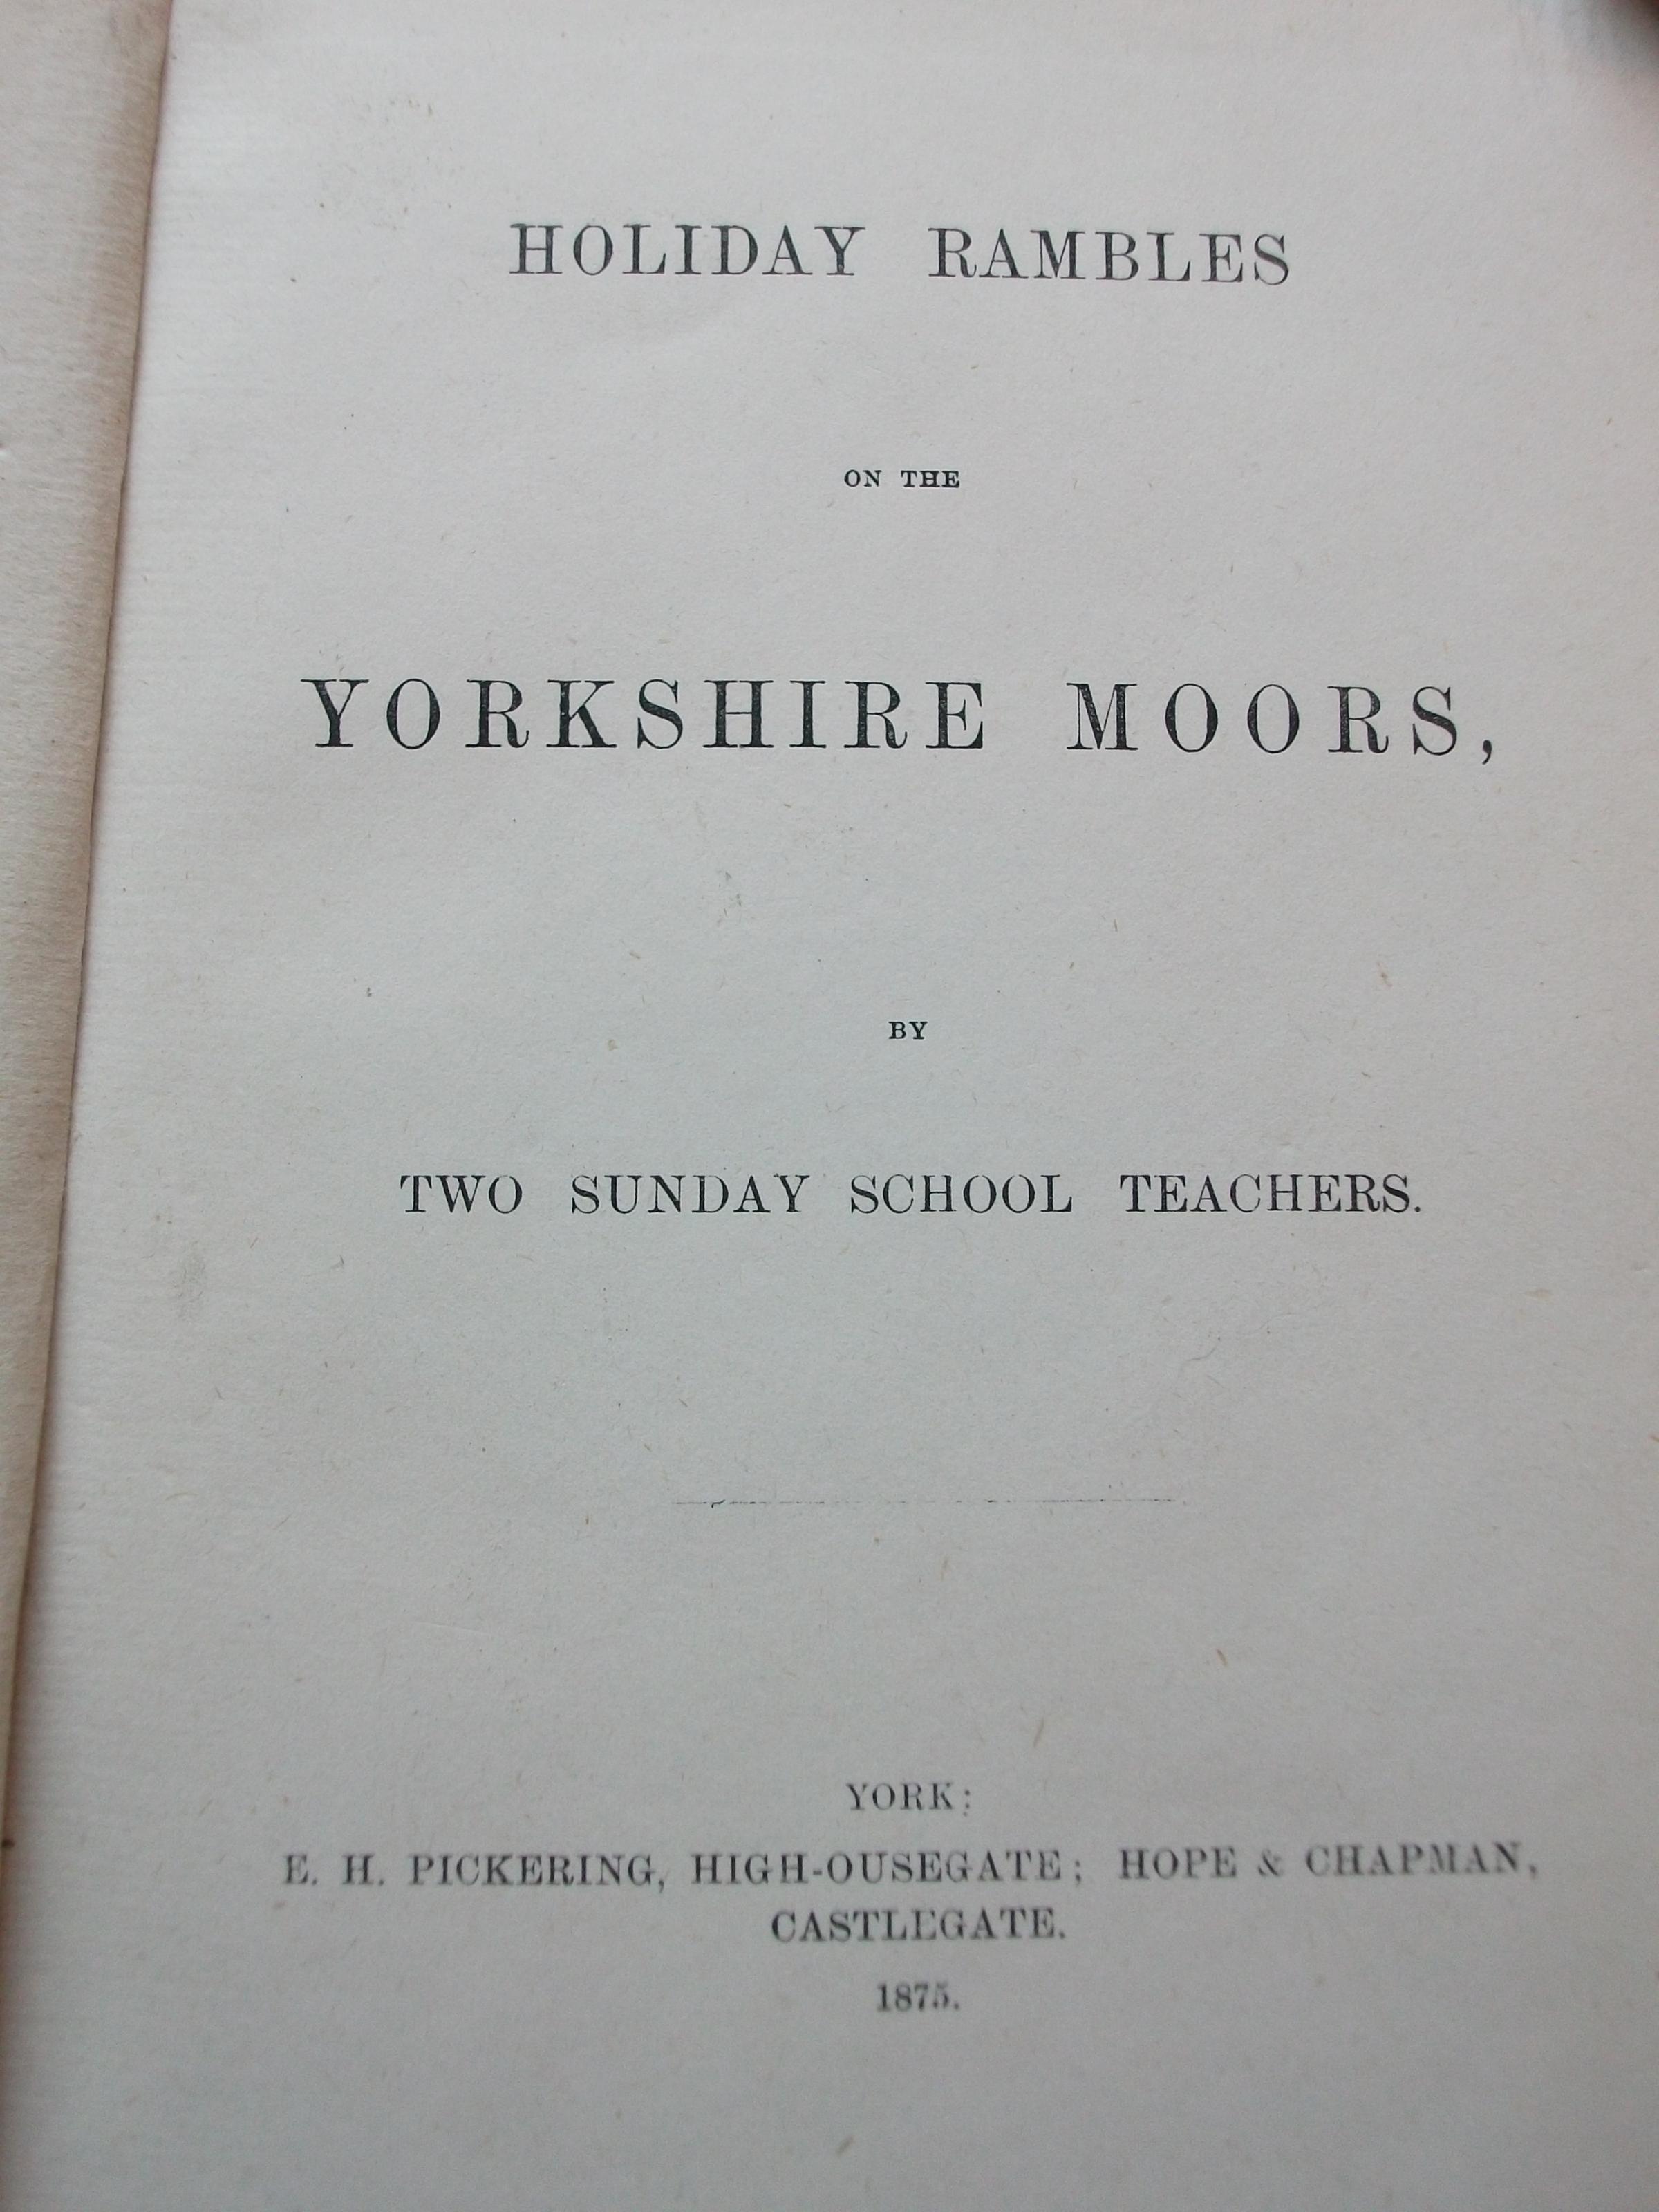 The title page of the book on Bransdale